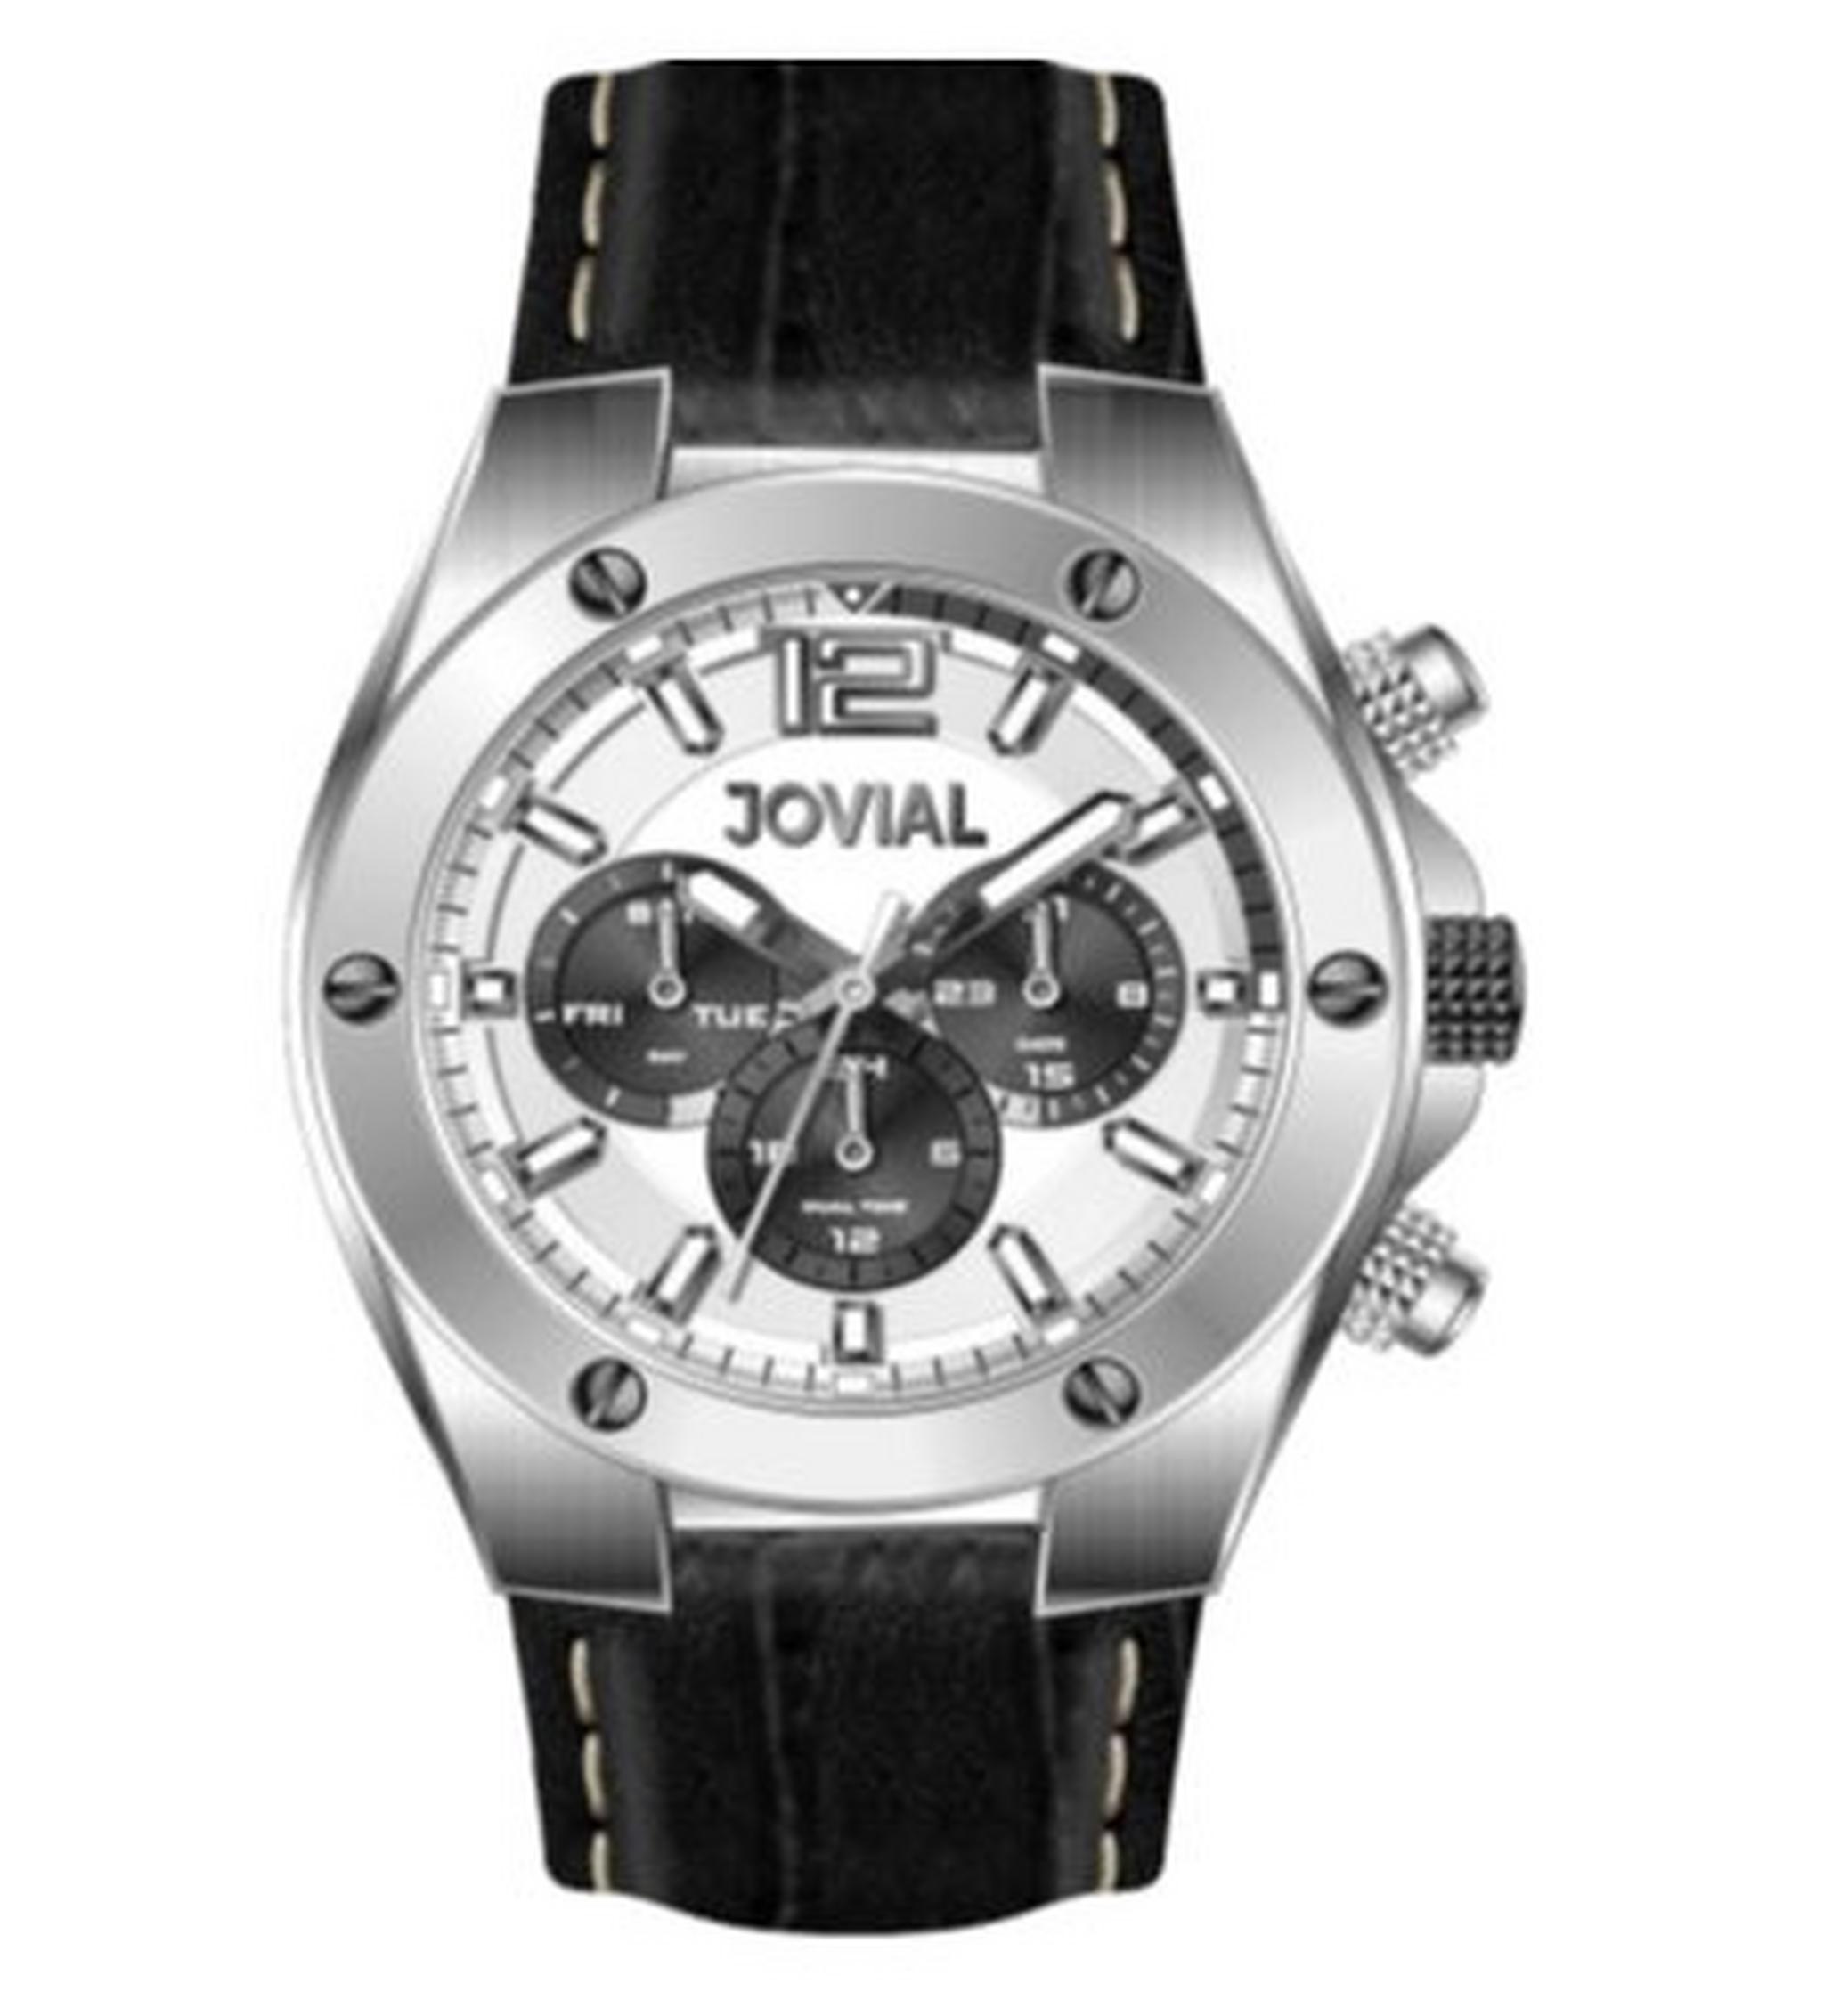 Jovial 18012-GSLQ-01 Gents Chronograph Watch - Leather Strap